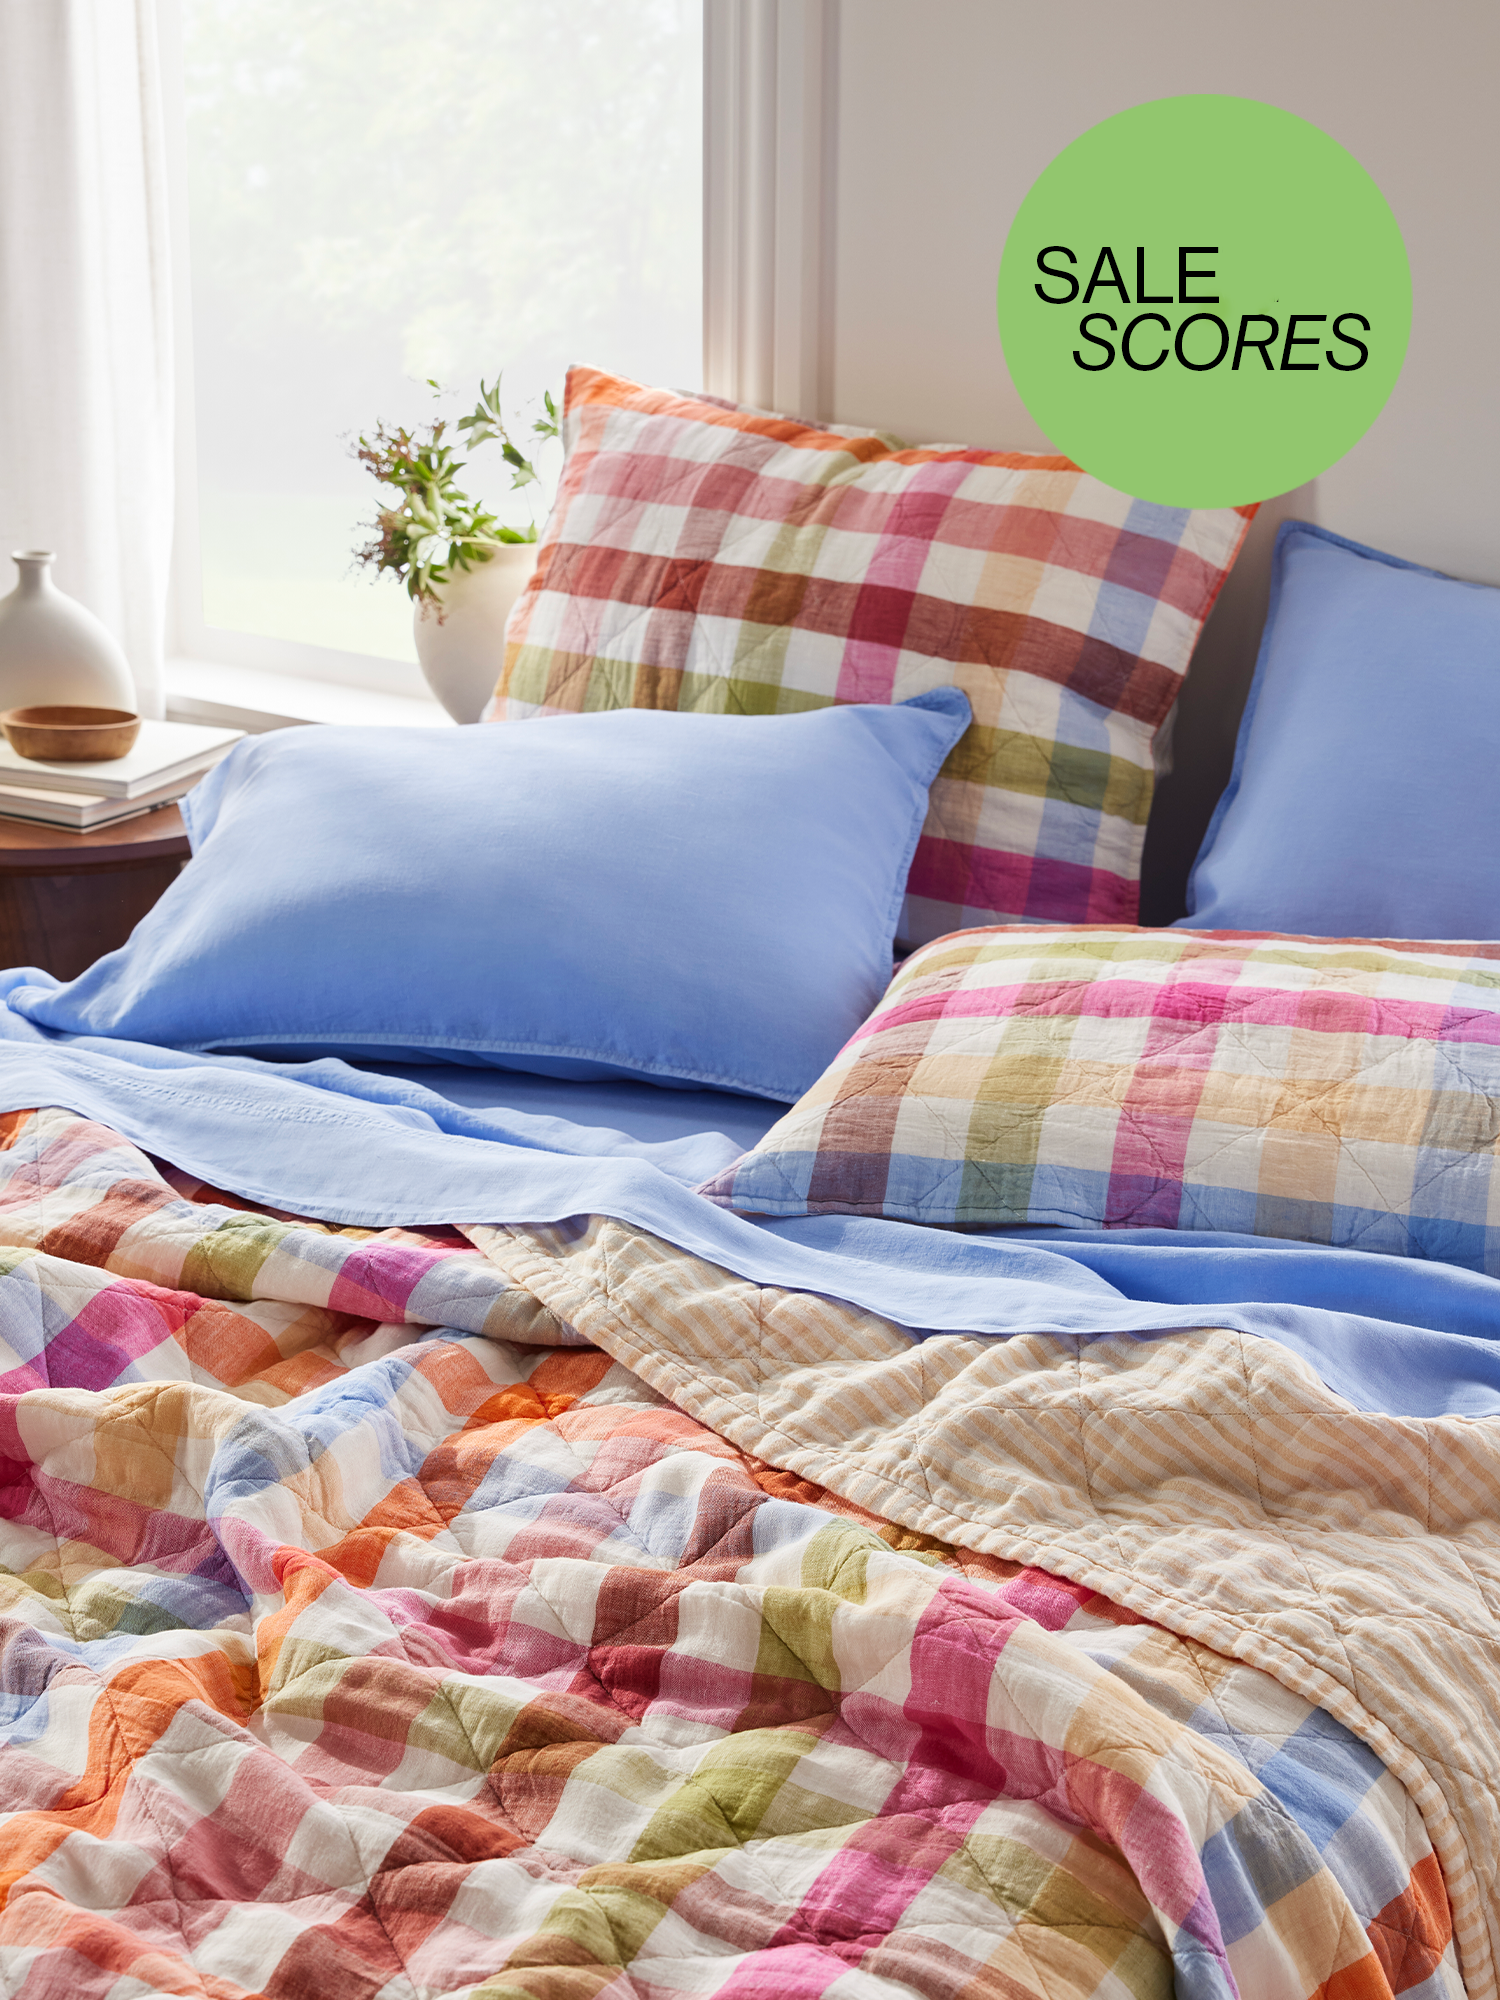 Brooklinen rainbow check quilt and blue sheets with sale scores button